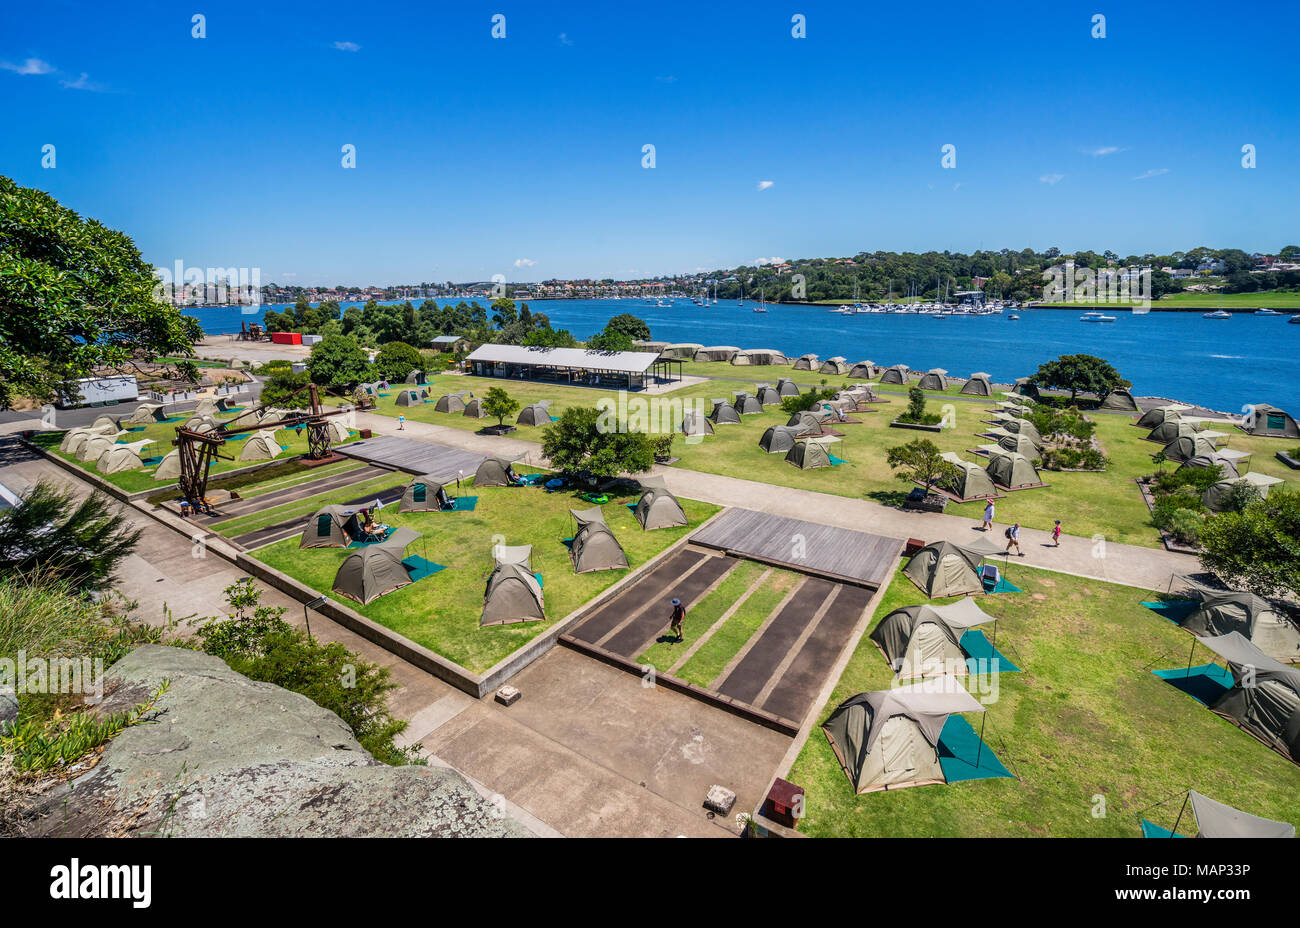 tent city campground for overnight visitors to Cockatoo Island shipyard heritage site, Sydney Harbour, New South Wales, Australia Stock Photo